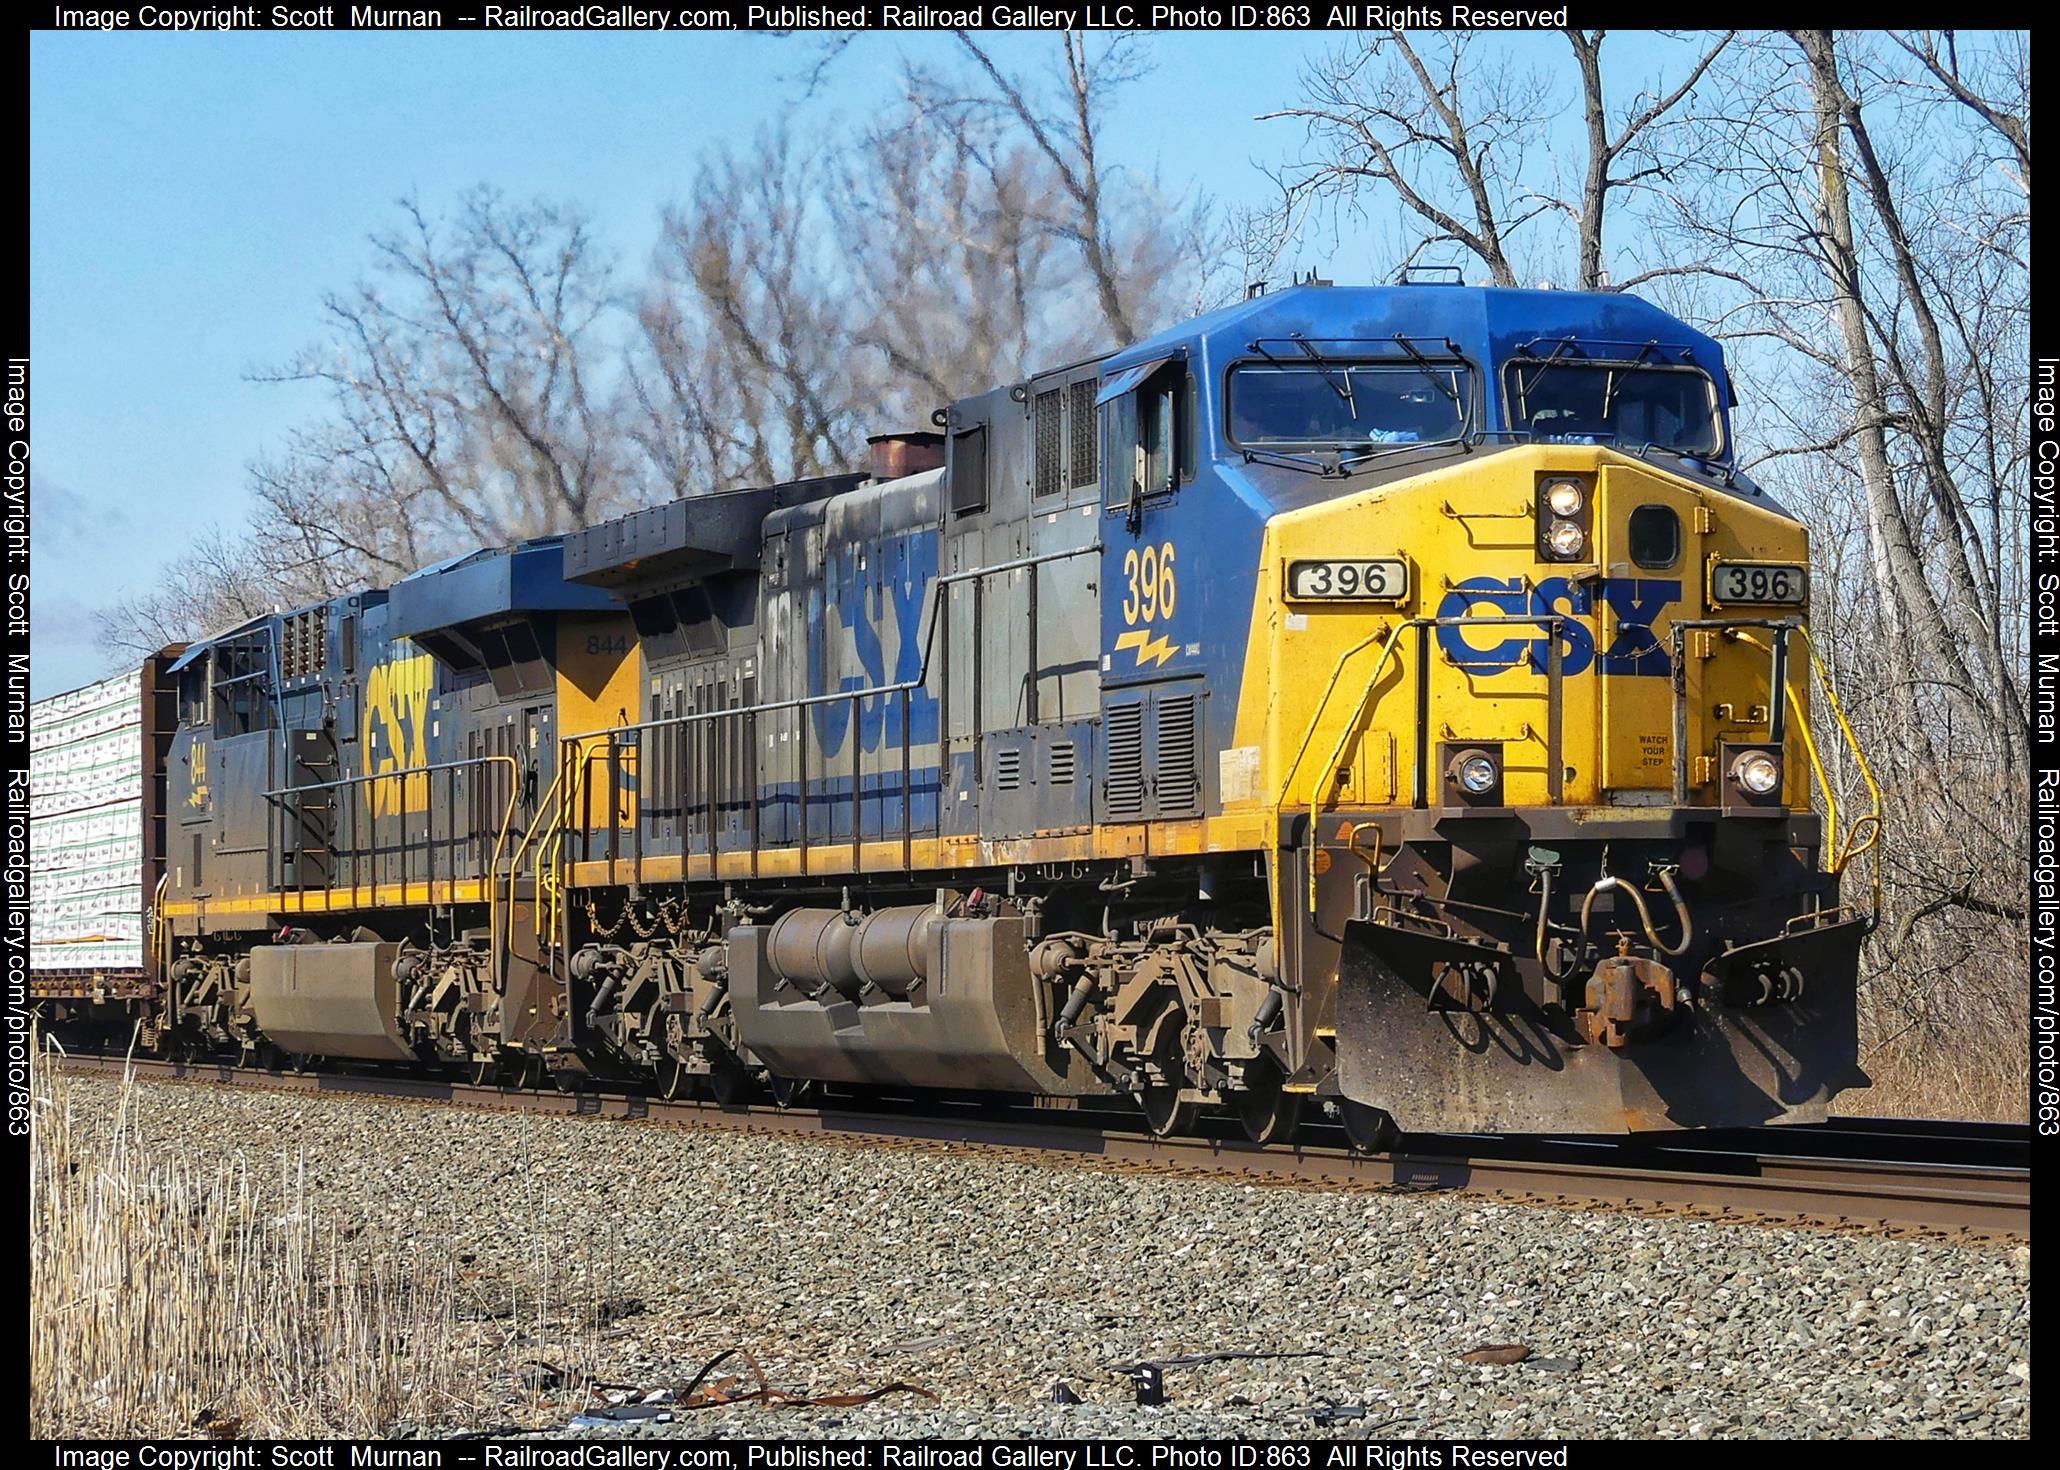 CSX 396 is a class CSX AC4400CW  and  is pictured in Macedon, New York, United States.  This was taken along the Rochester Subdivision  on the CSX Transportation. Photo Copyright: Scott  Murnan  uploaded to Railroad Gallery on 03/20/2023. This photograph of CSX 396 was taken on Monday, March 20, 2023. All Rights Reserved. 